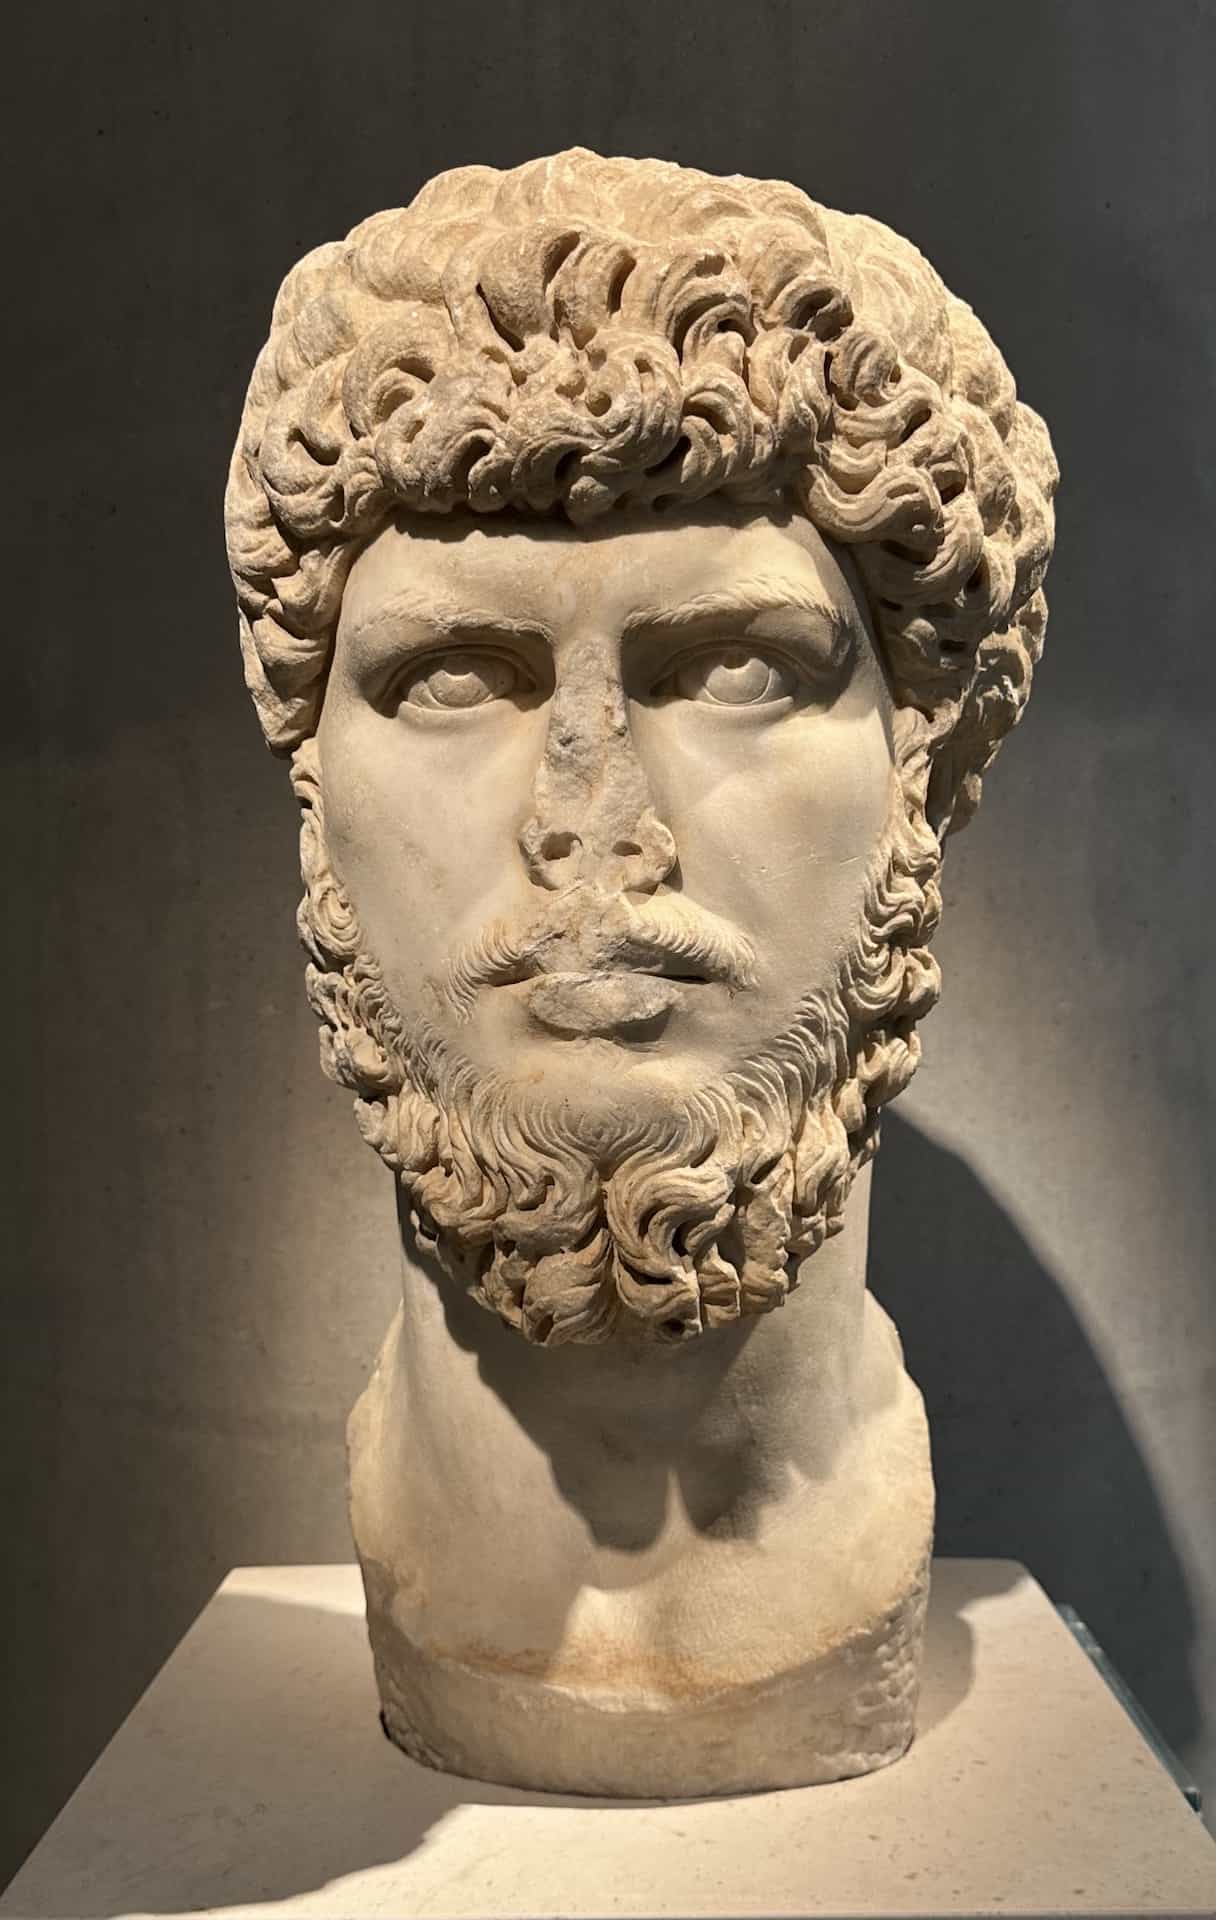 Portrait of the Emperor Lucius Verus; 161-170 at the Acropolis Museum in Athens, Greece